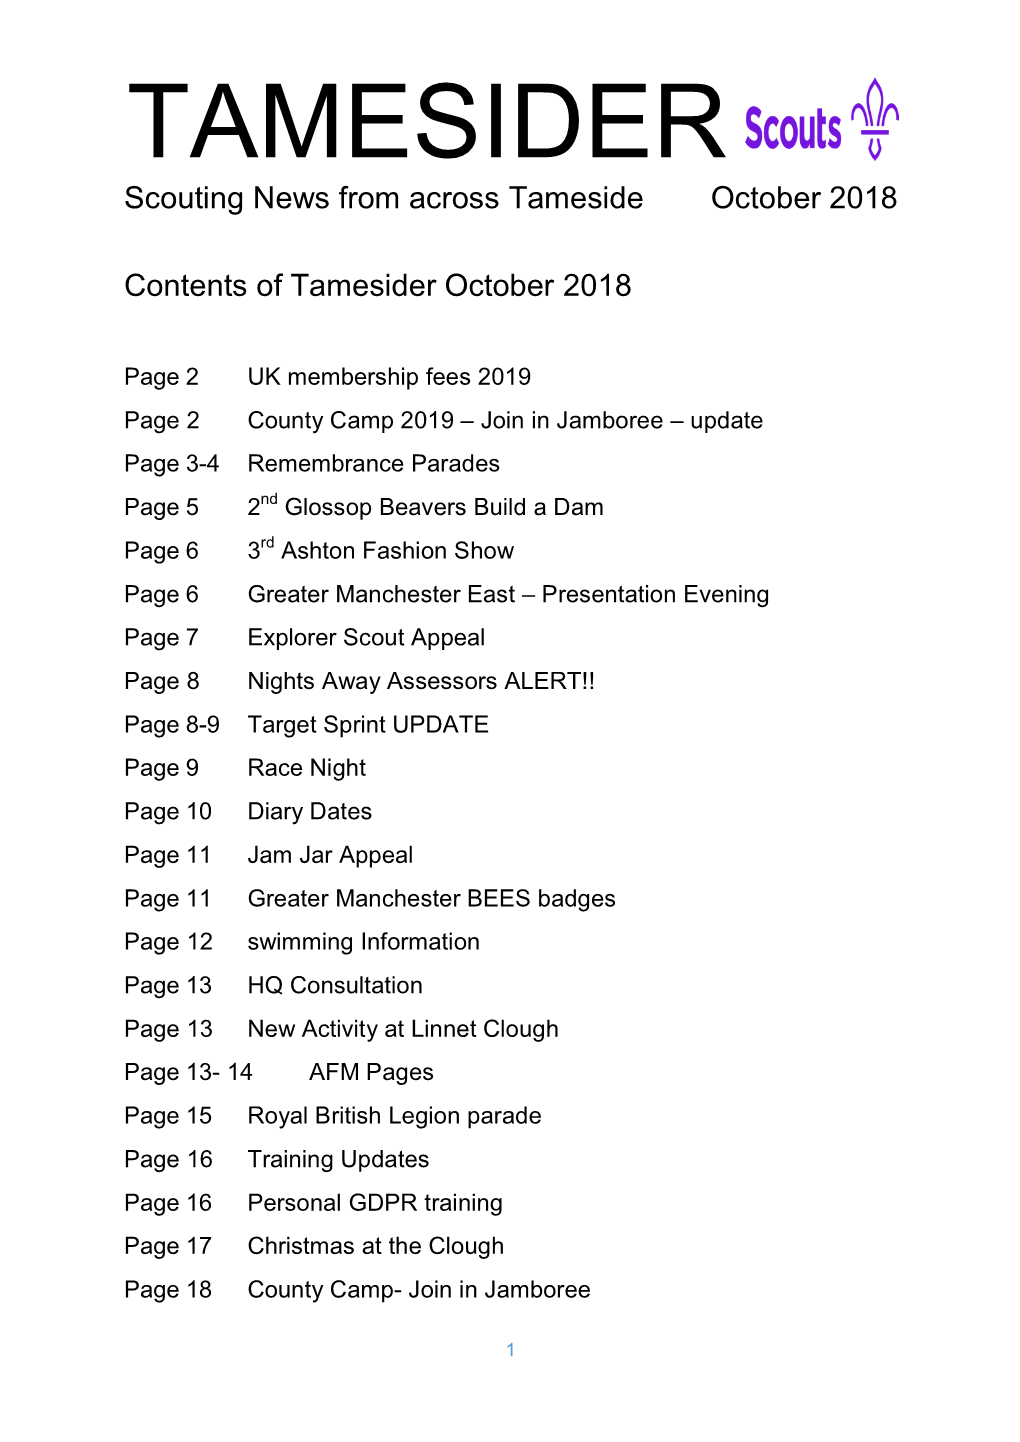 TAMESIDER Scouting News from Across Tameside October 2018